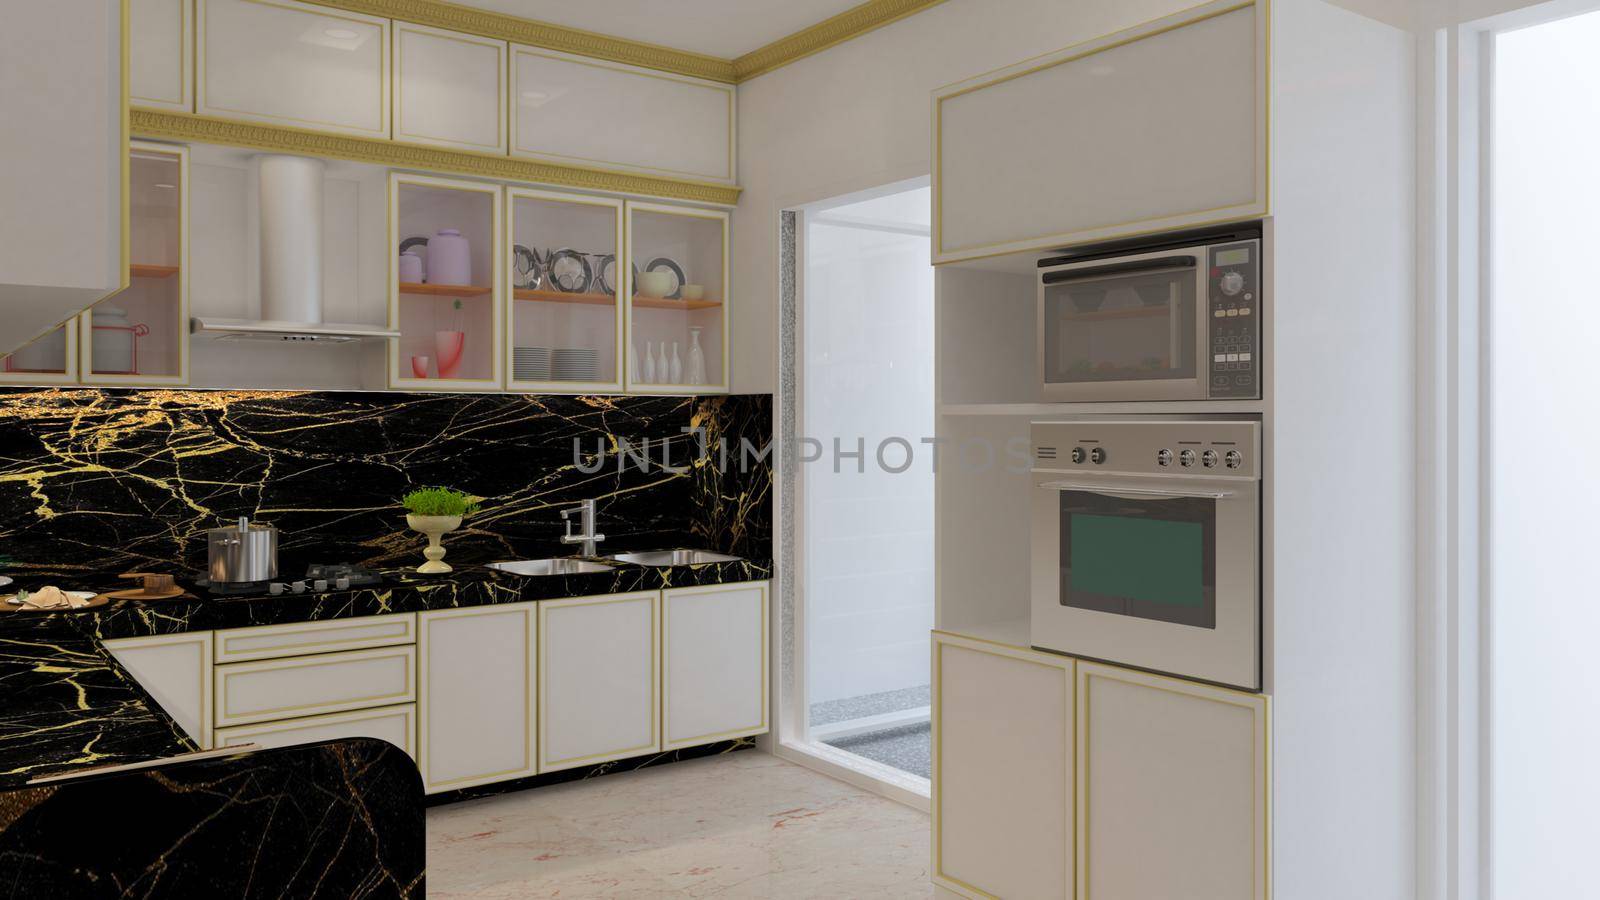 3d render Illustration classic style kitchen. white, black and gold theme classic kitchen. by Maharana777